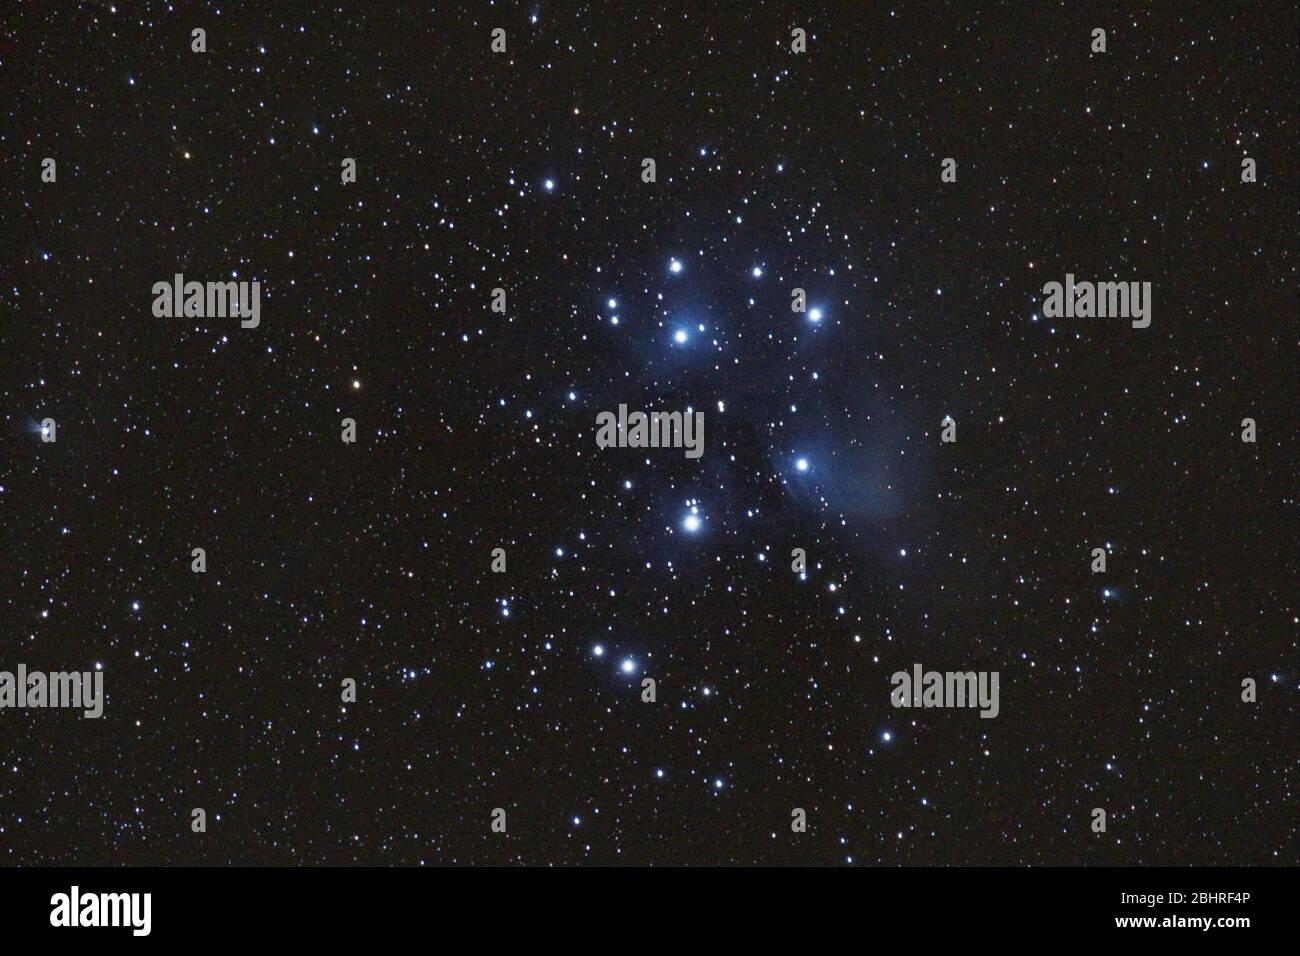 M45 - the Pleiades, Seven Sisters, Deep Sky Astrophoto, Science. the plejades M45 open star cluster in the constellation of taurus. Stock Photo